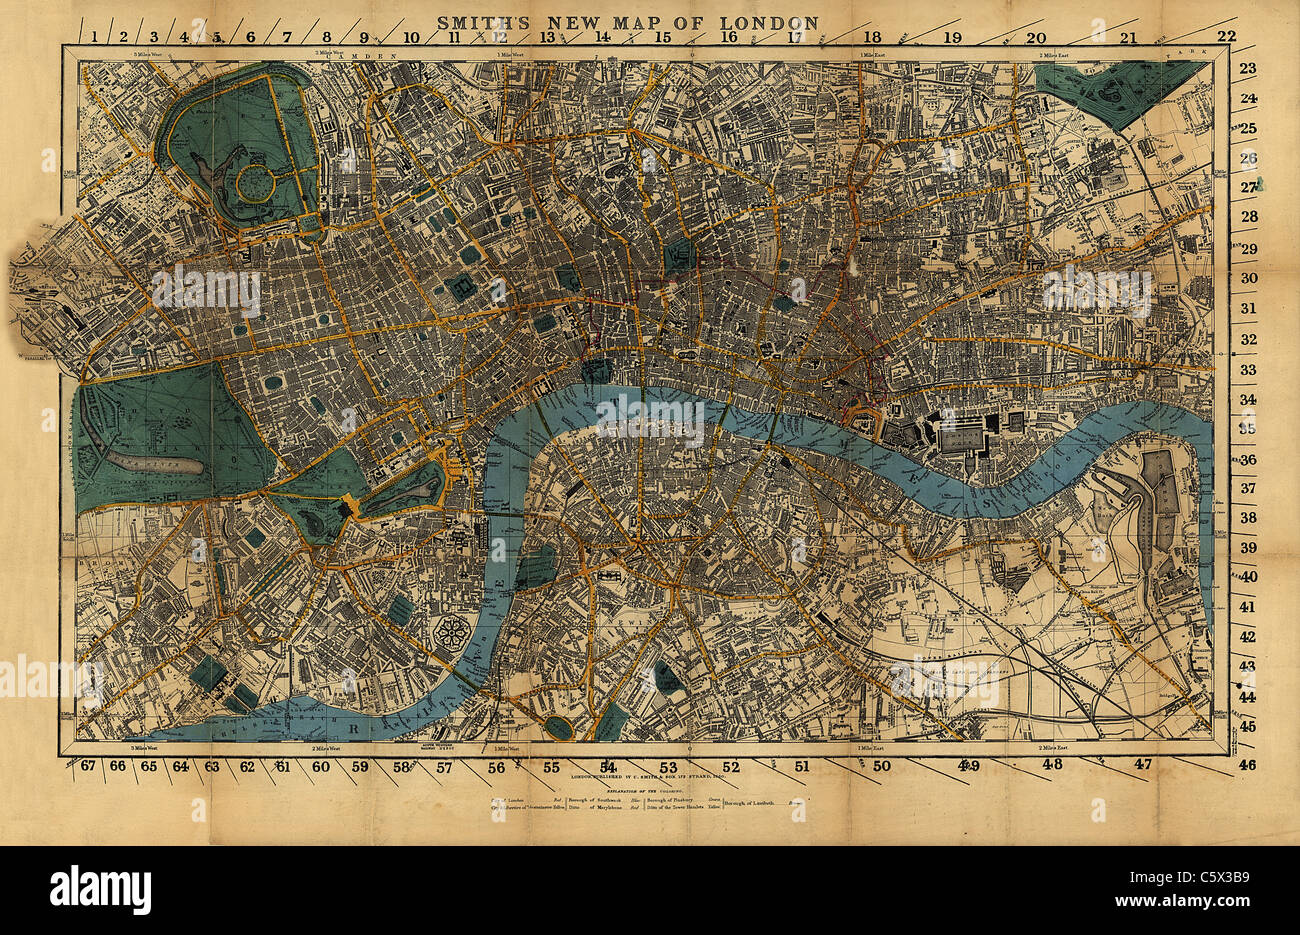 Smith's New Map of London, 1860 Banque D'Images